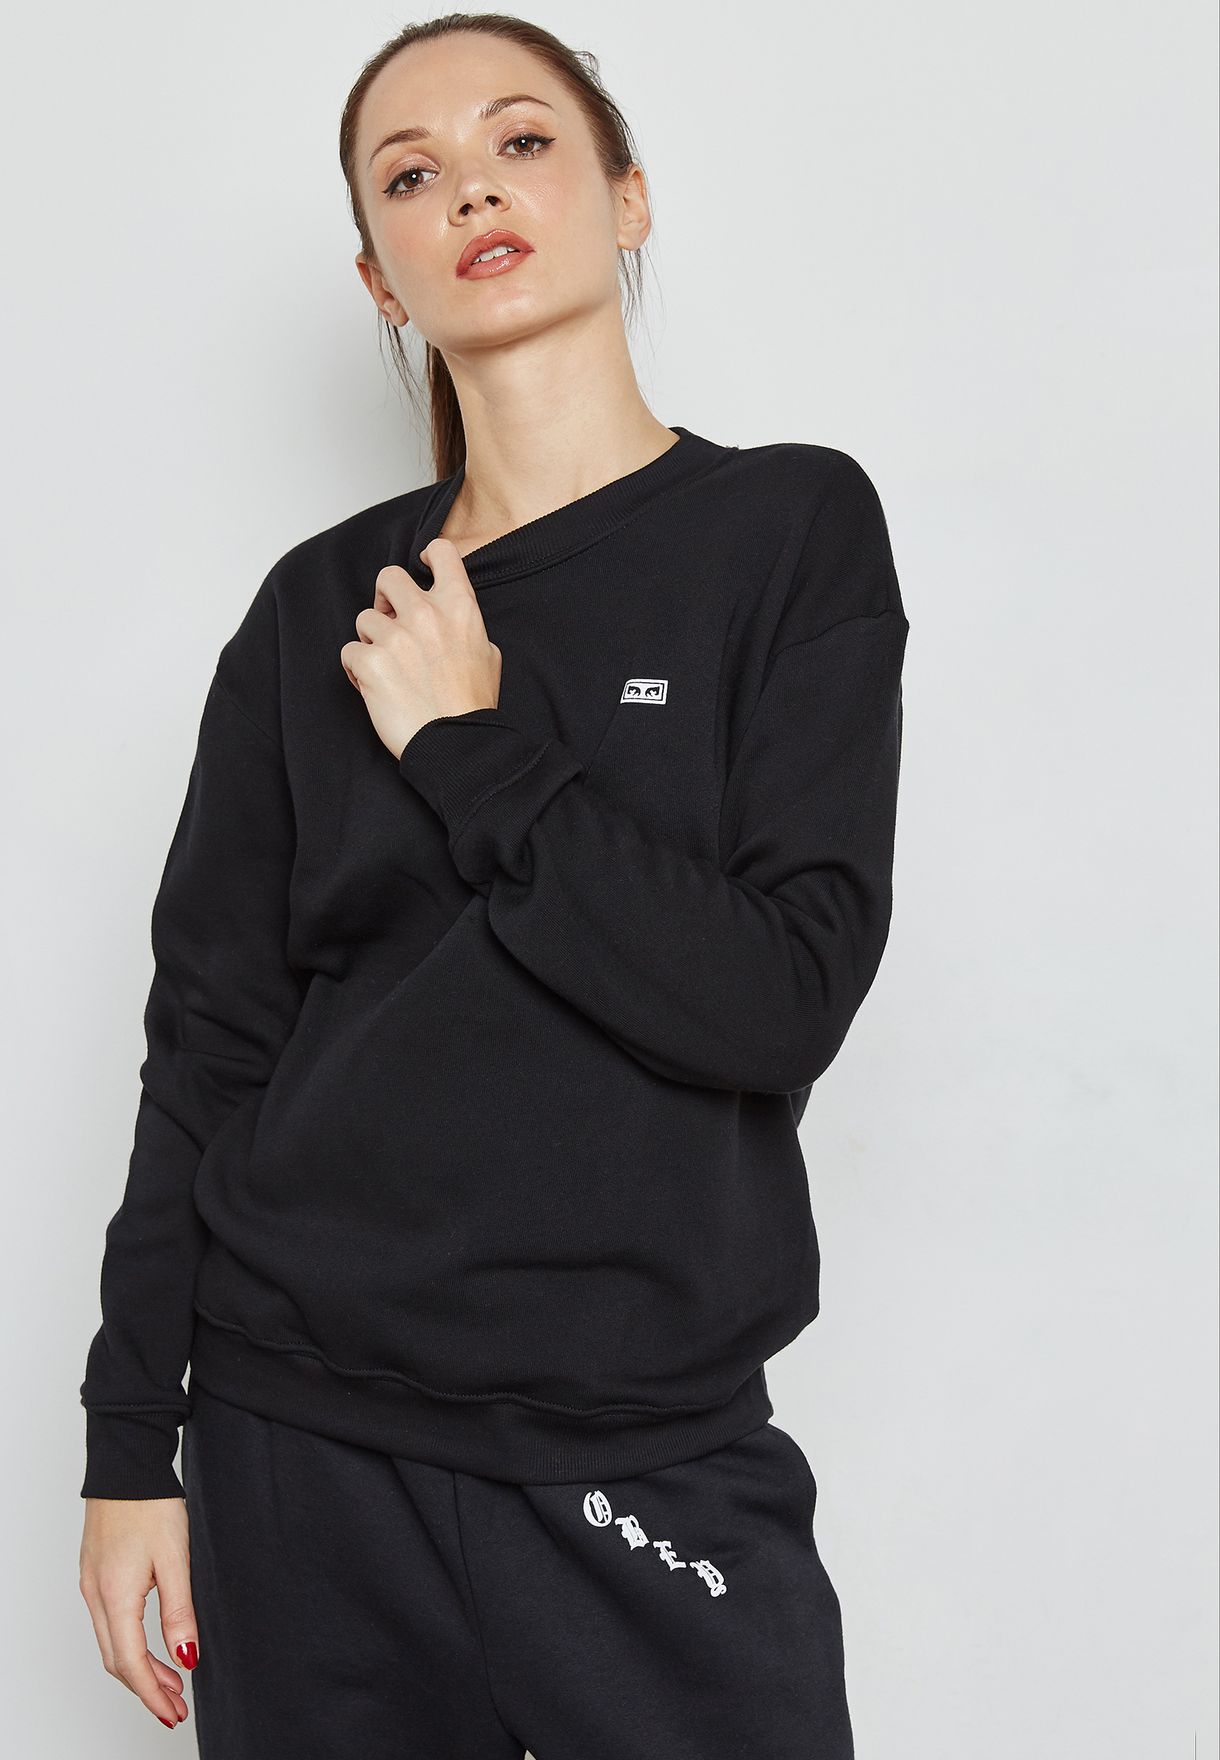 obey crew neck womens